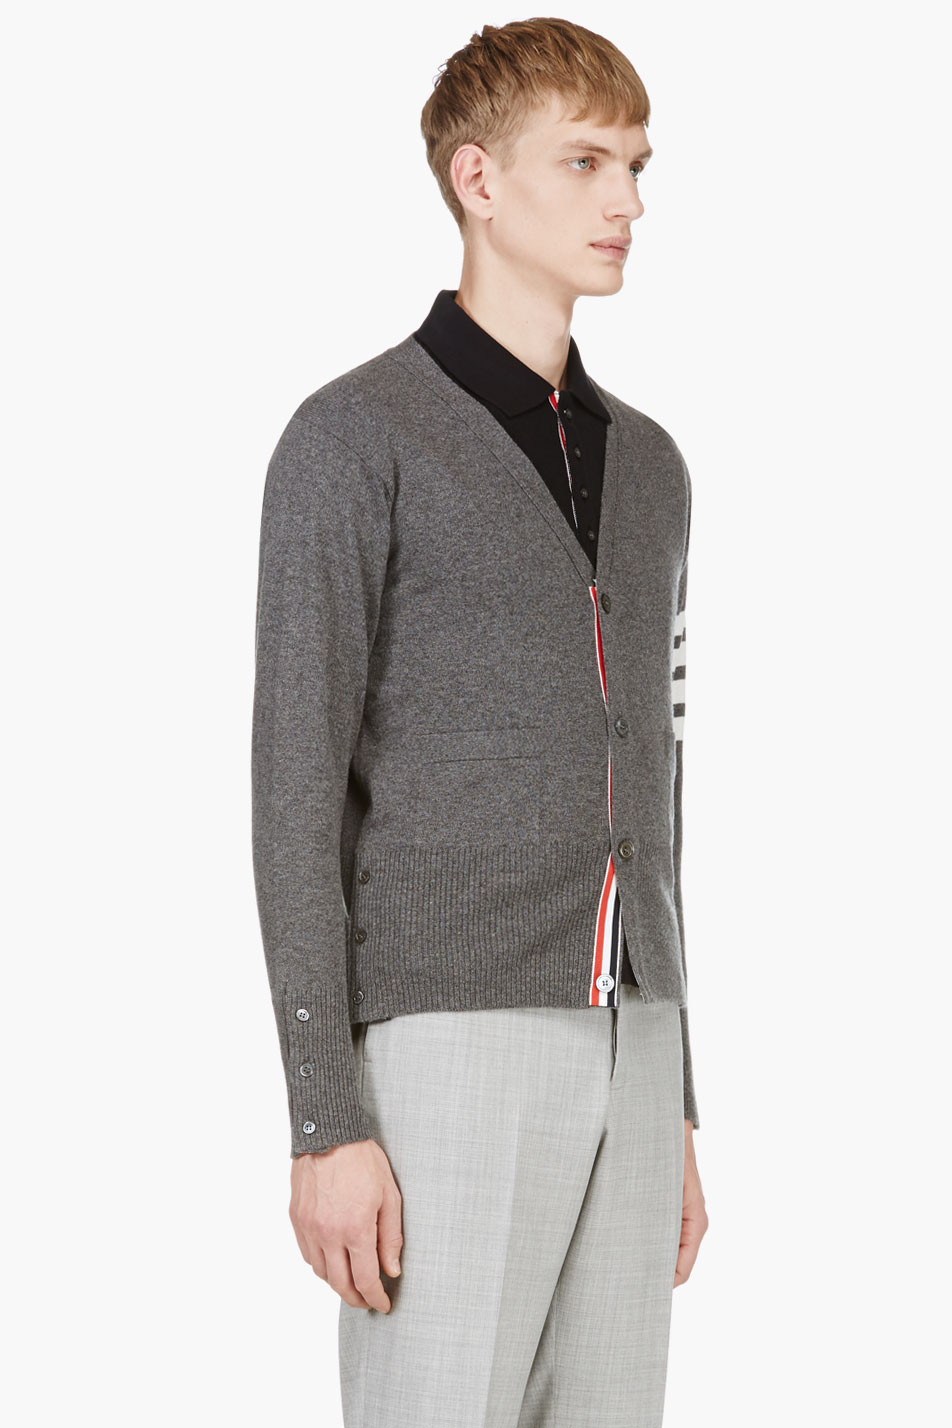 Lyst - Thom Browne Grey Cashmere Racer Stripe Cardigan in Gray for Men